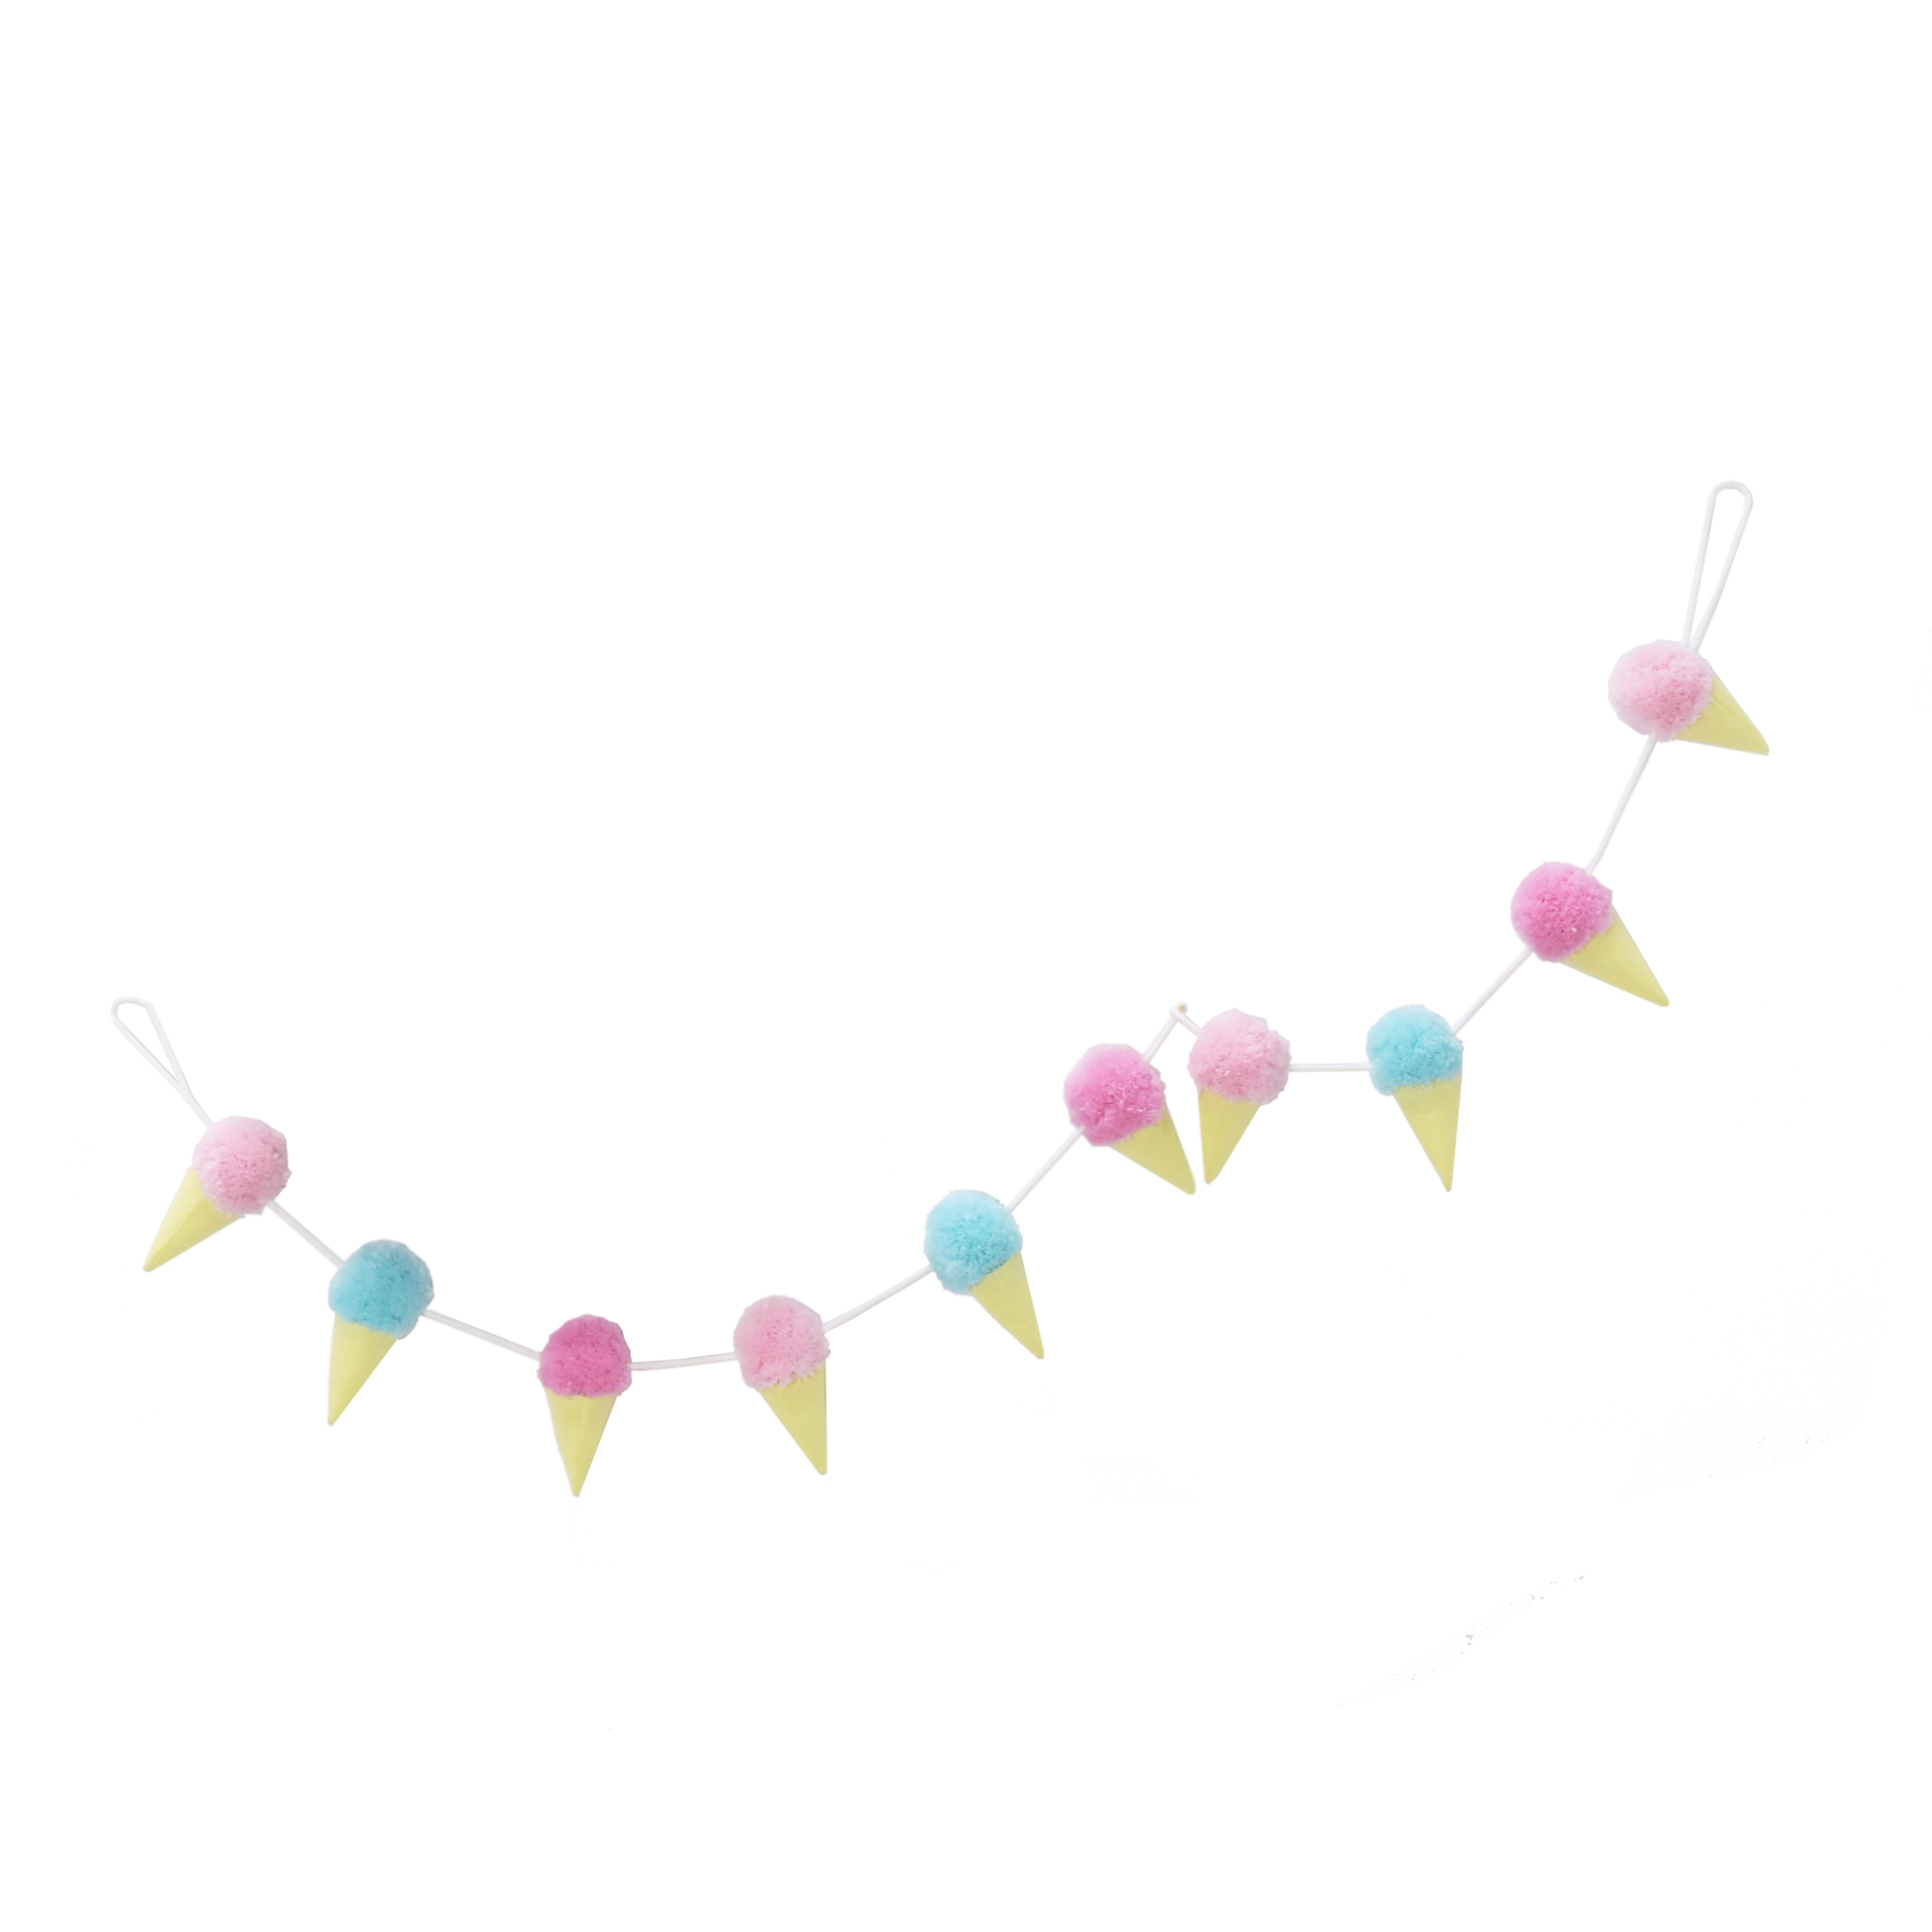 Garland clipart pearl. Lolli living page ice